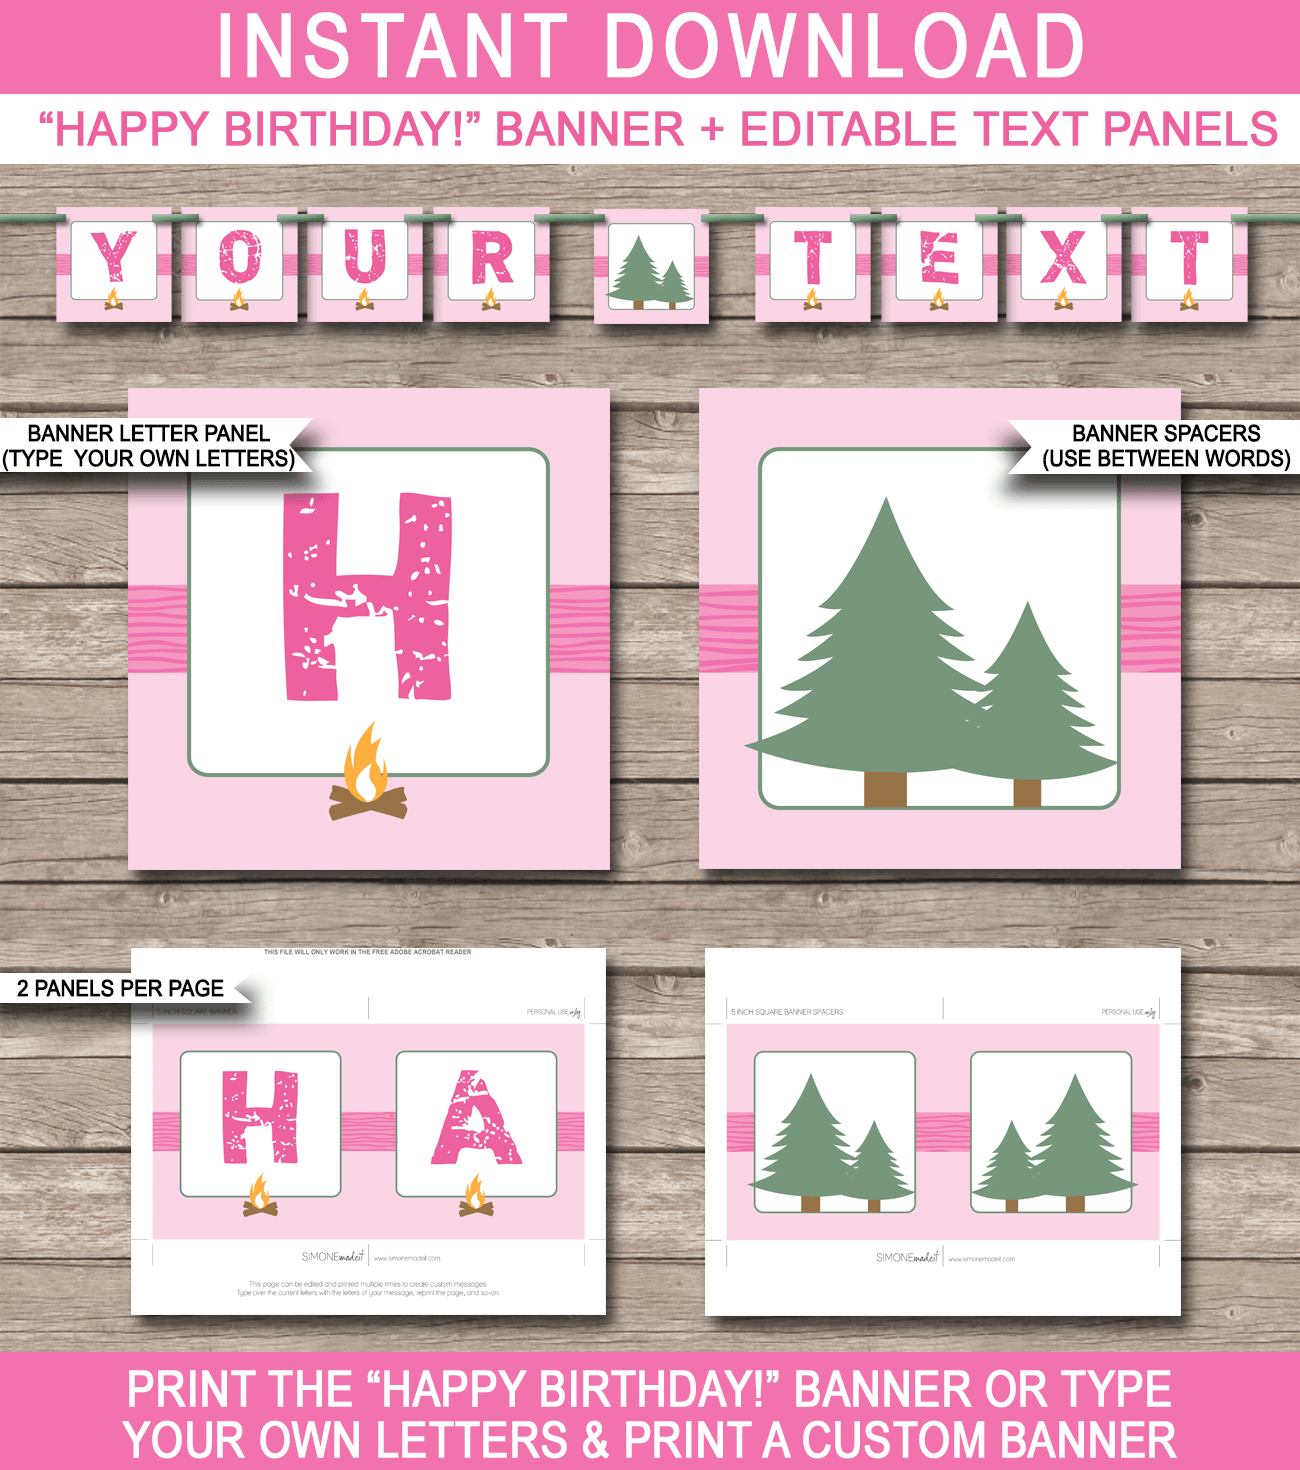 Girls Camping Banner Template - Pink Camping Bunting - Happy Birthday Banner - Birthday Party - Editable and Printable DIY Template - INSTANT DOWNLOAD $4.50 via simonemadeit.com